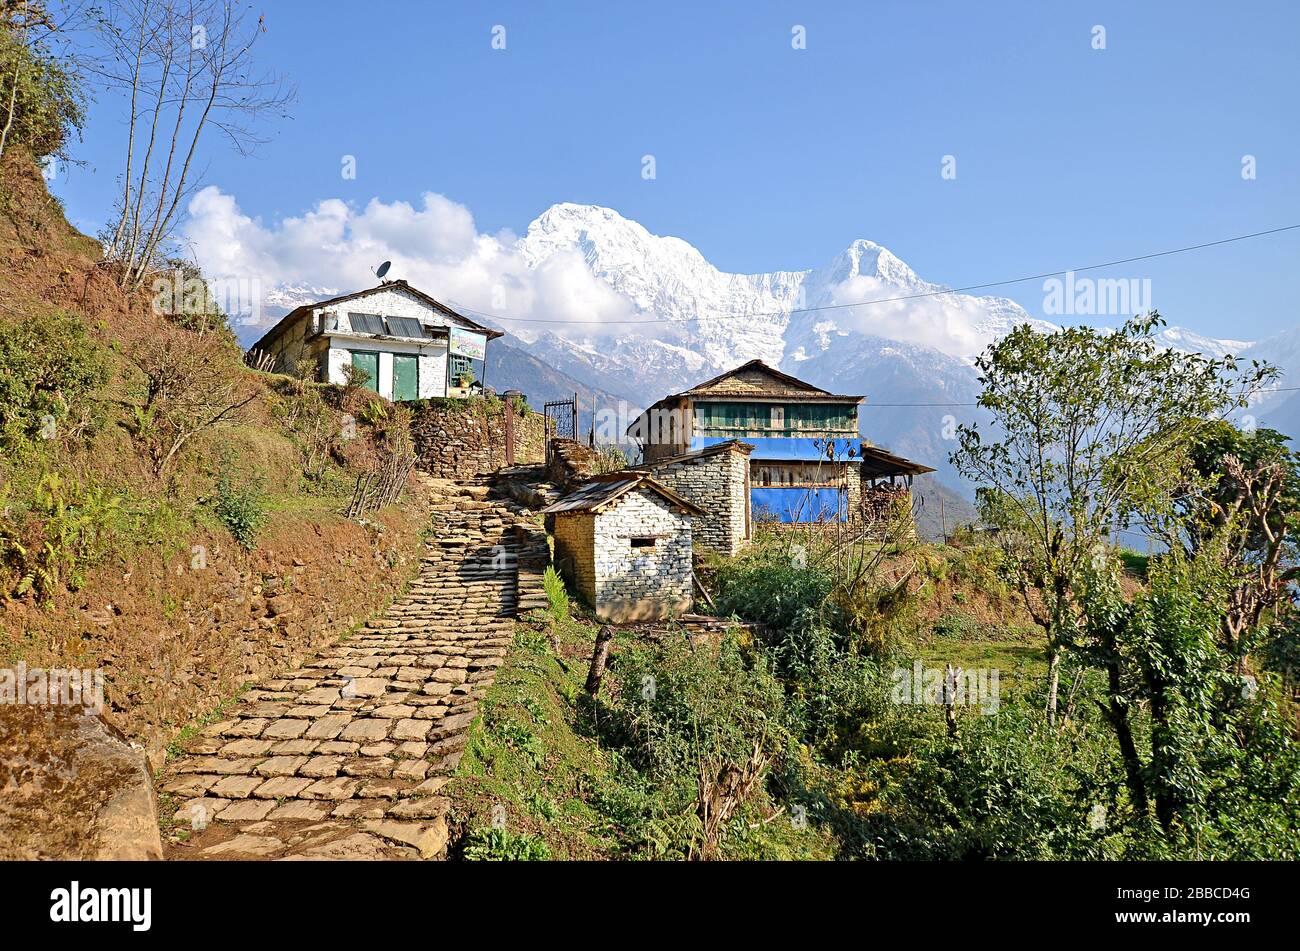 View at Ghandruk village, its buildings and grey roofs with Annapurna massif at the background with Fishtail mountain. The Himalayas mountains, Nepal. Stock Photo